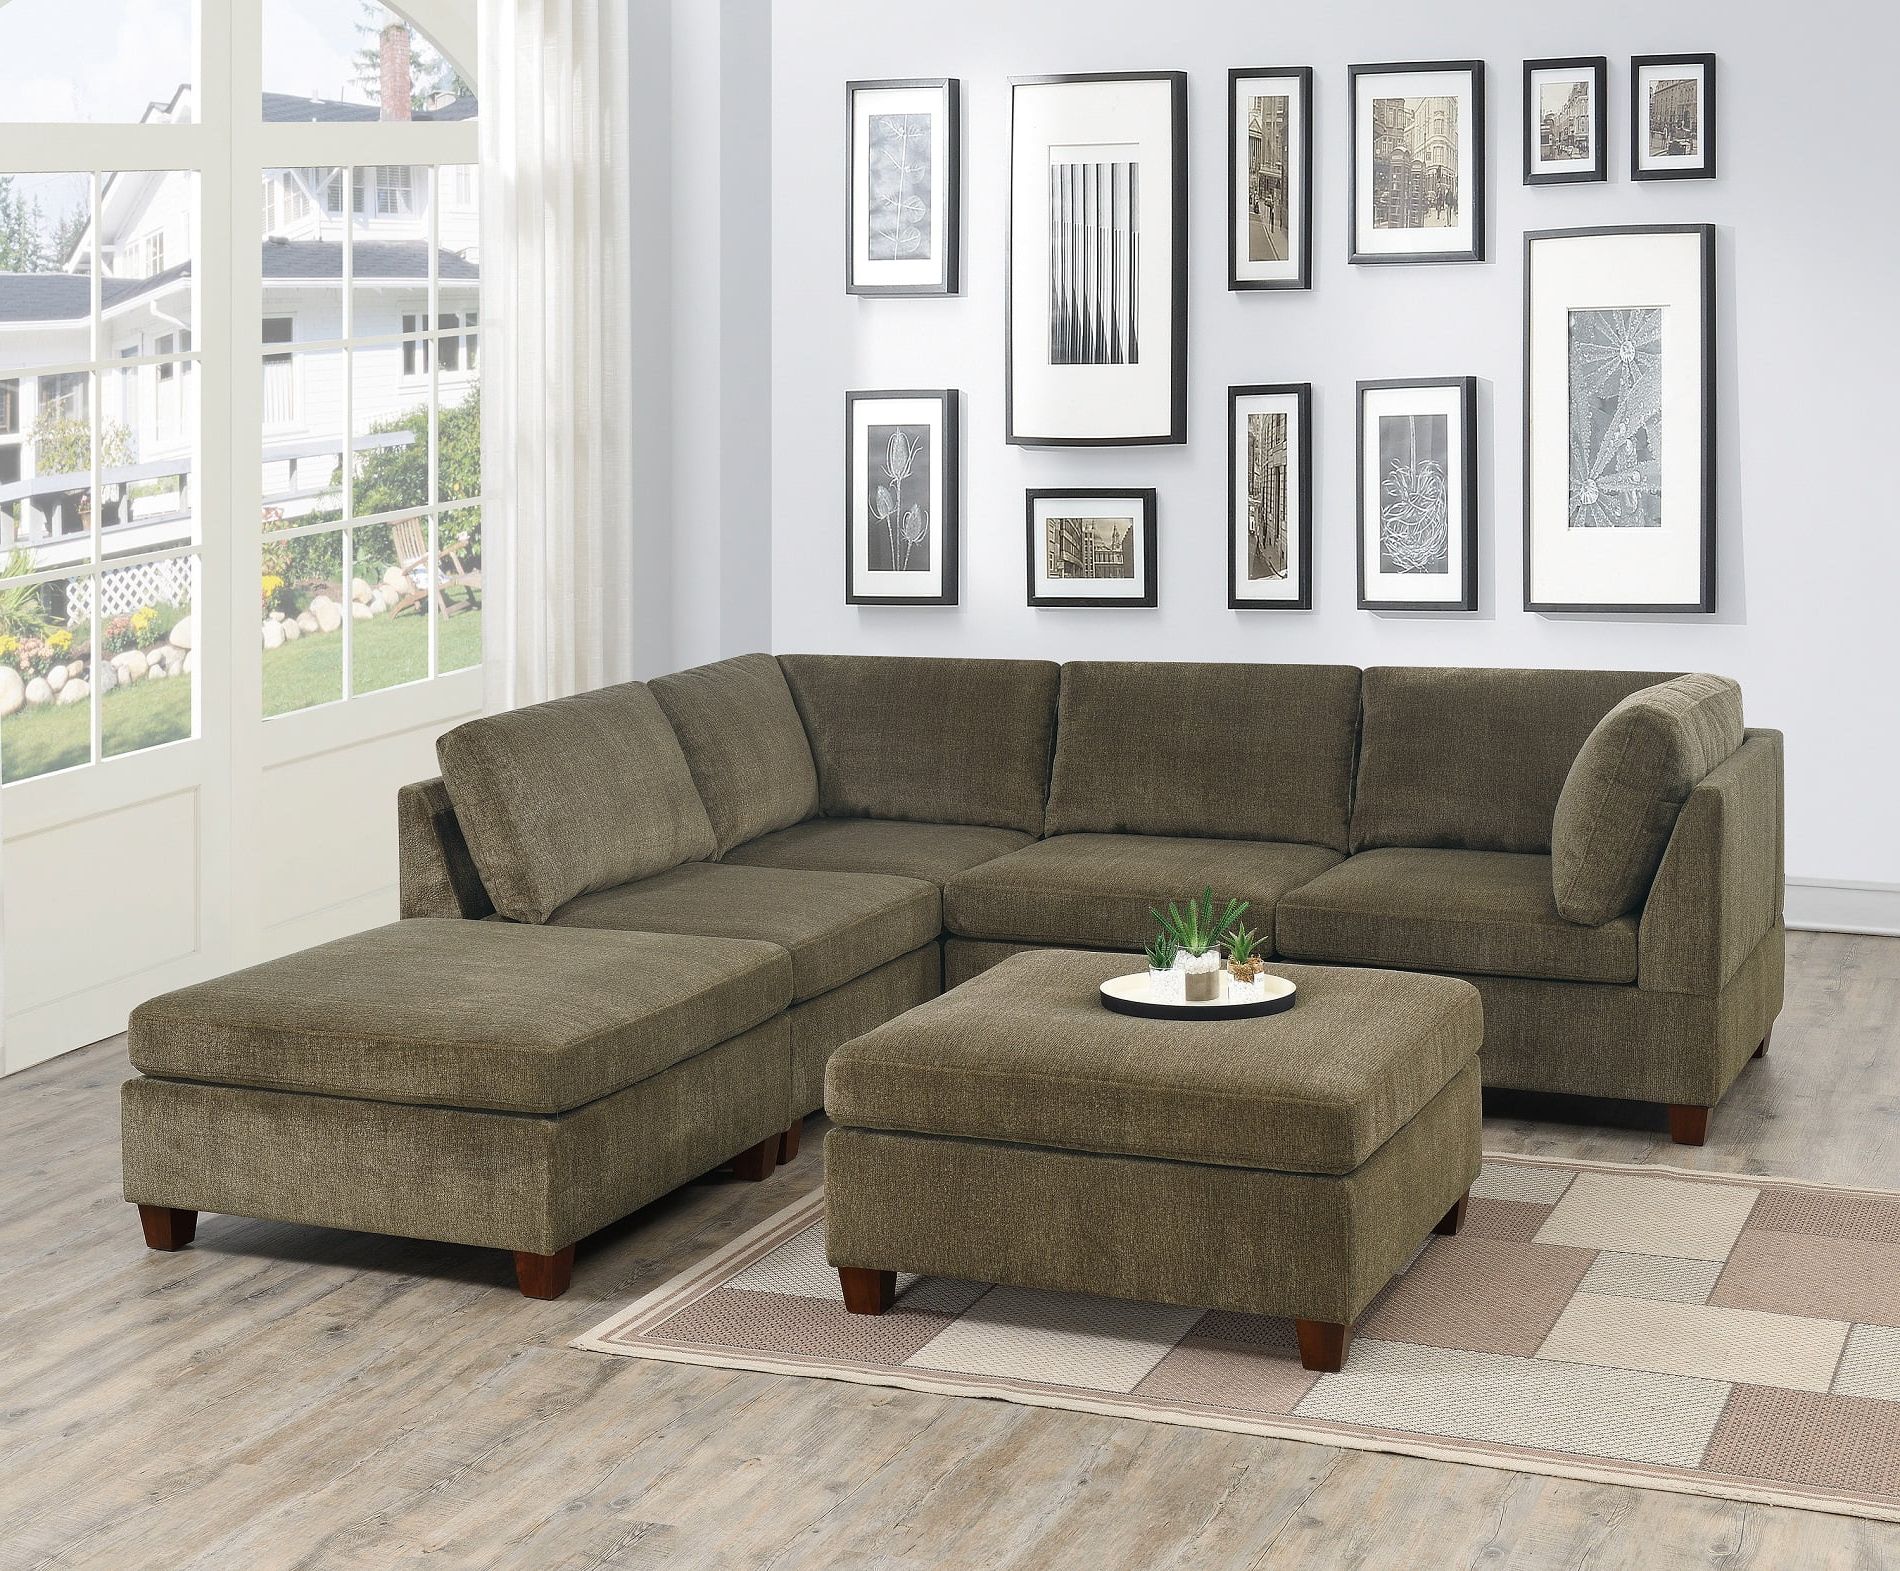 Well Liked Chenille Sectional Sofas With Contemporary Modern Unique Modular 6pc Sectional Sofa Set Tan Color (View 5 of 15)